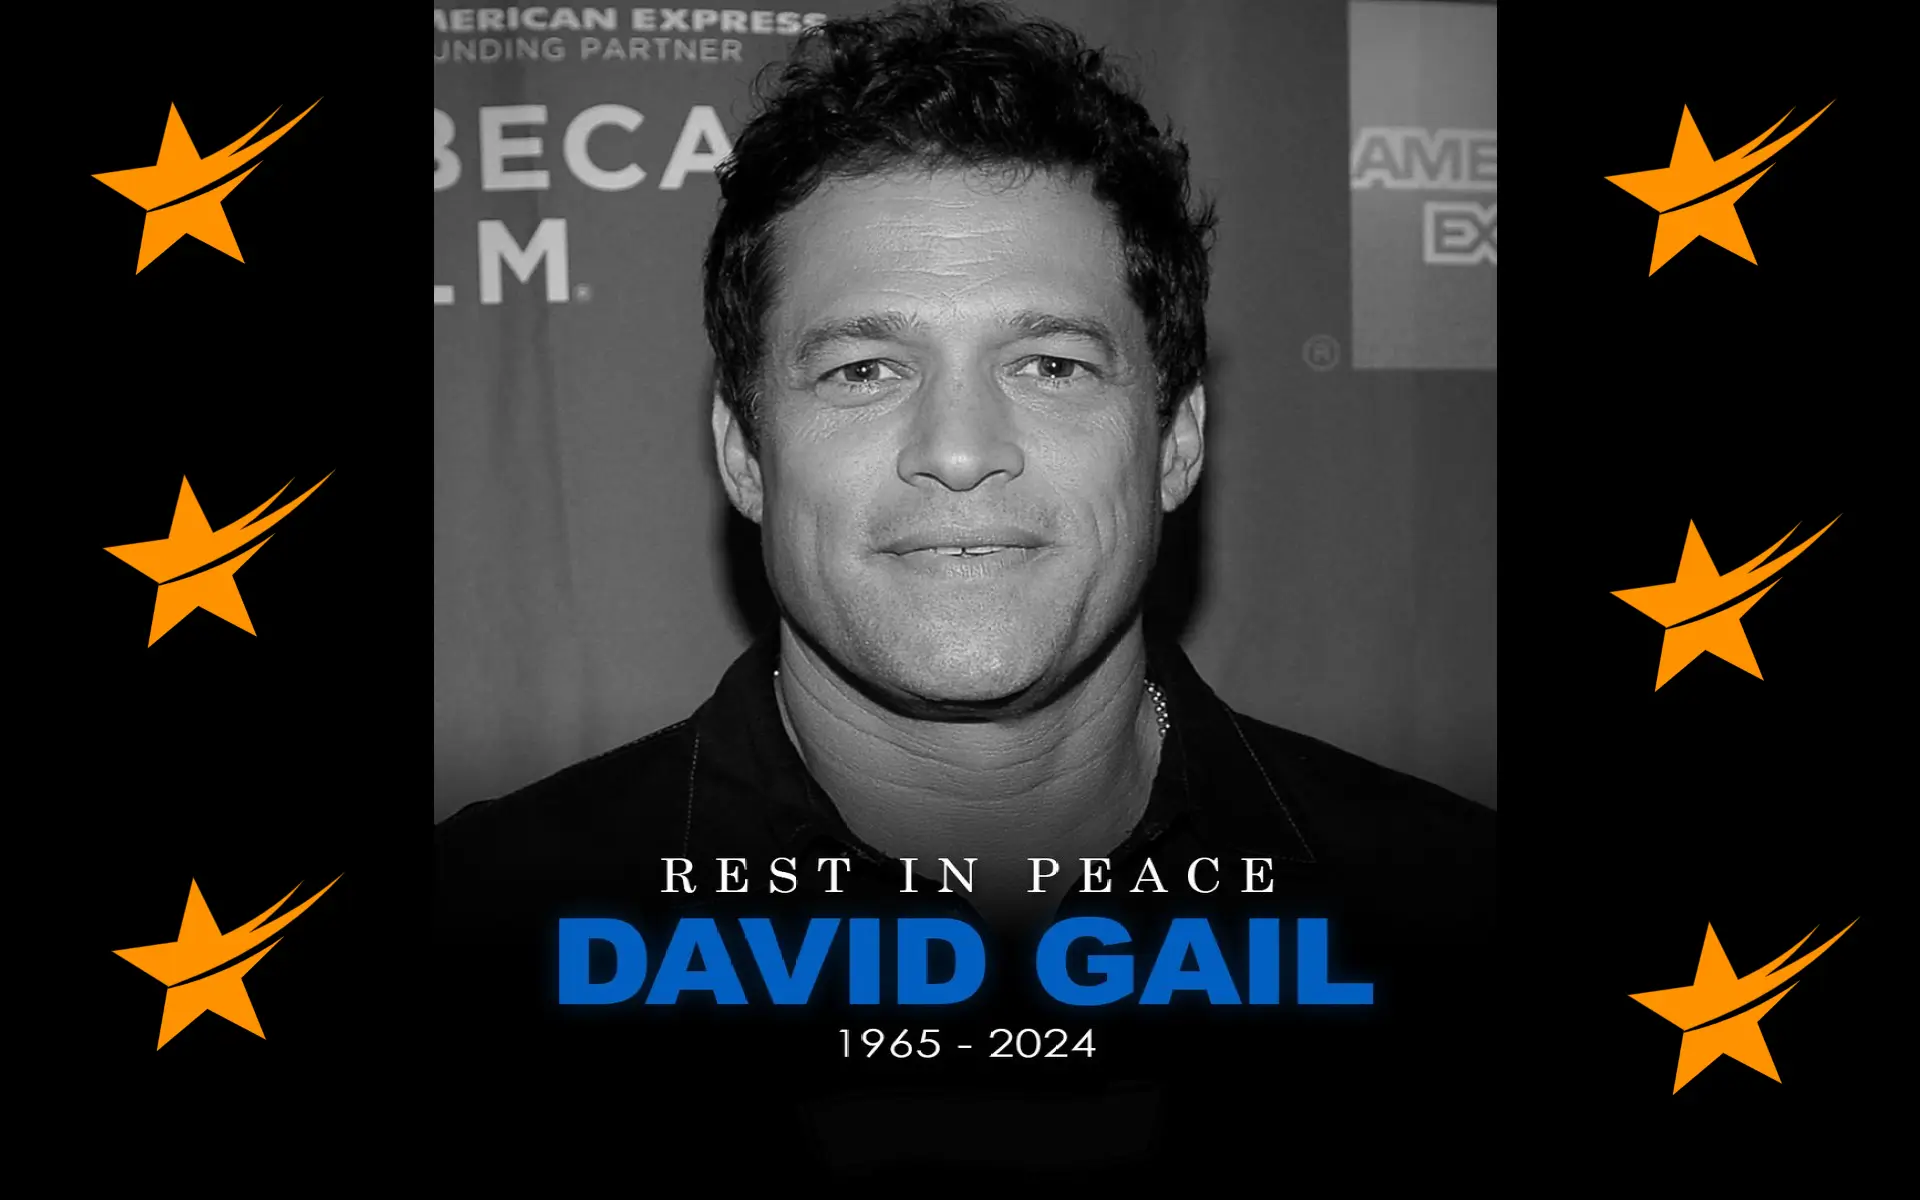 Remembering David Gail A Tribute to the Beverly Hills 90210 Actor